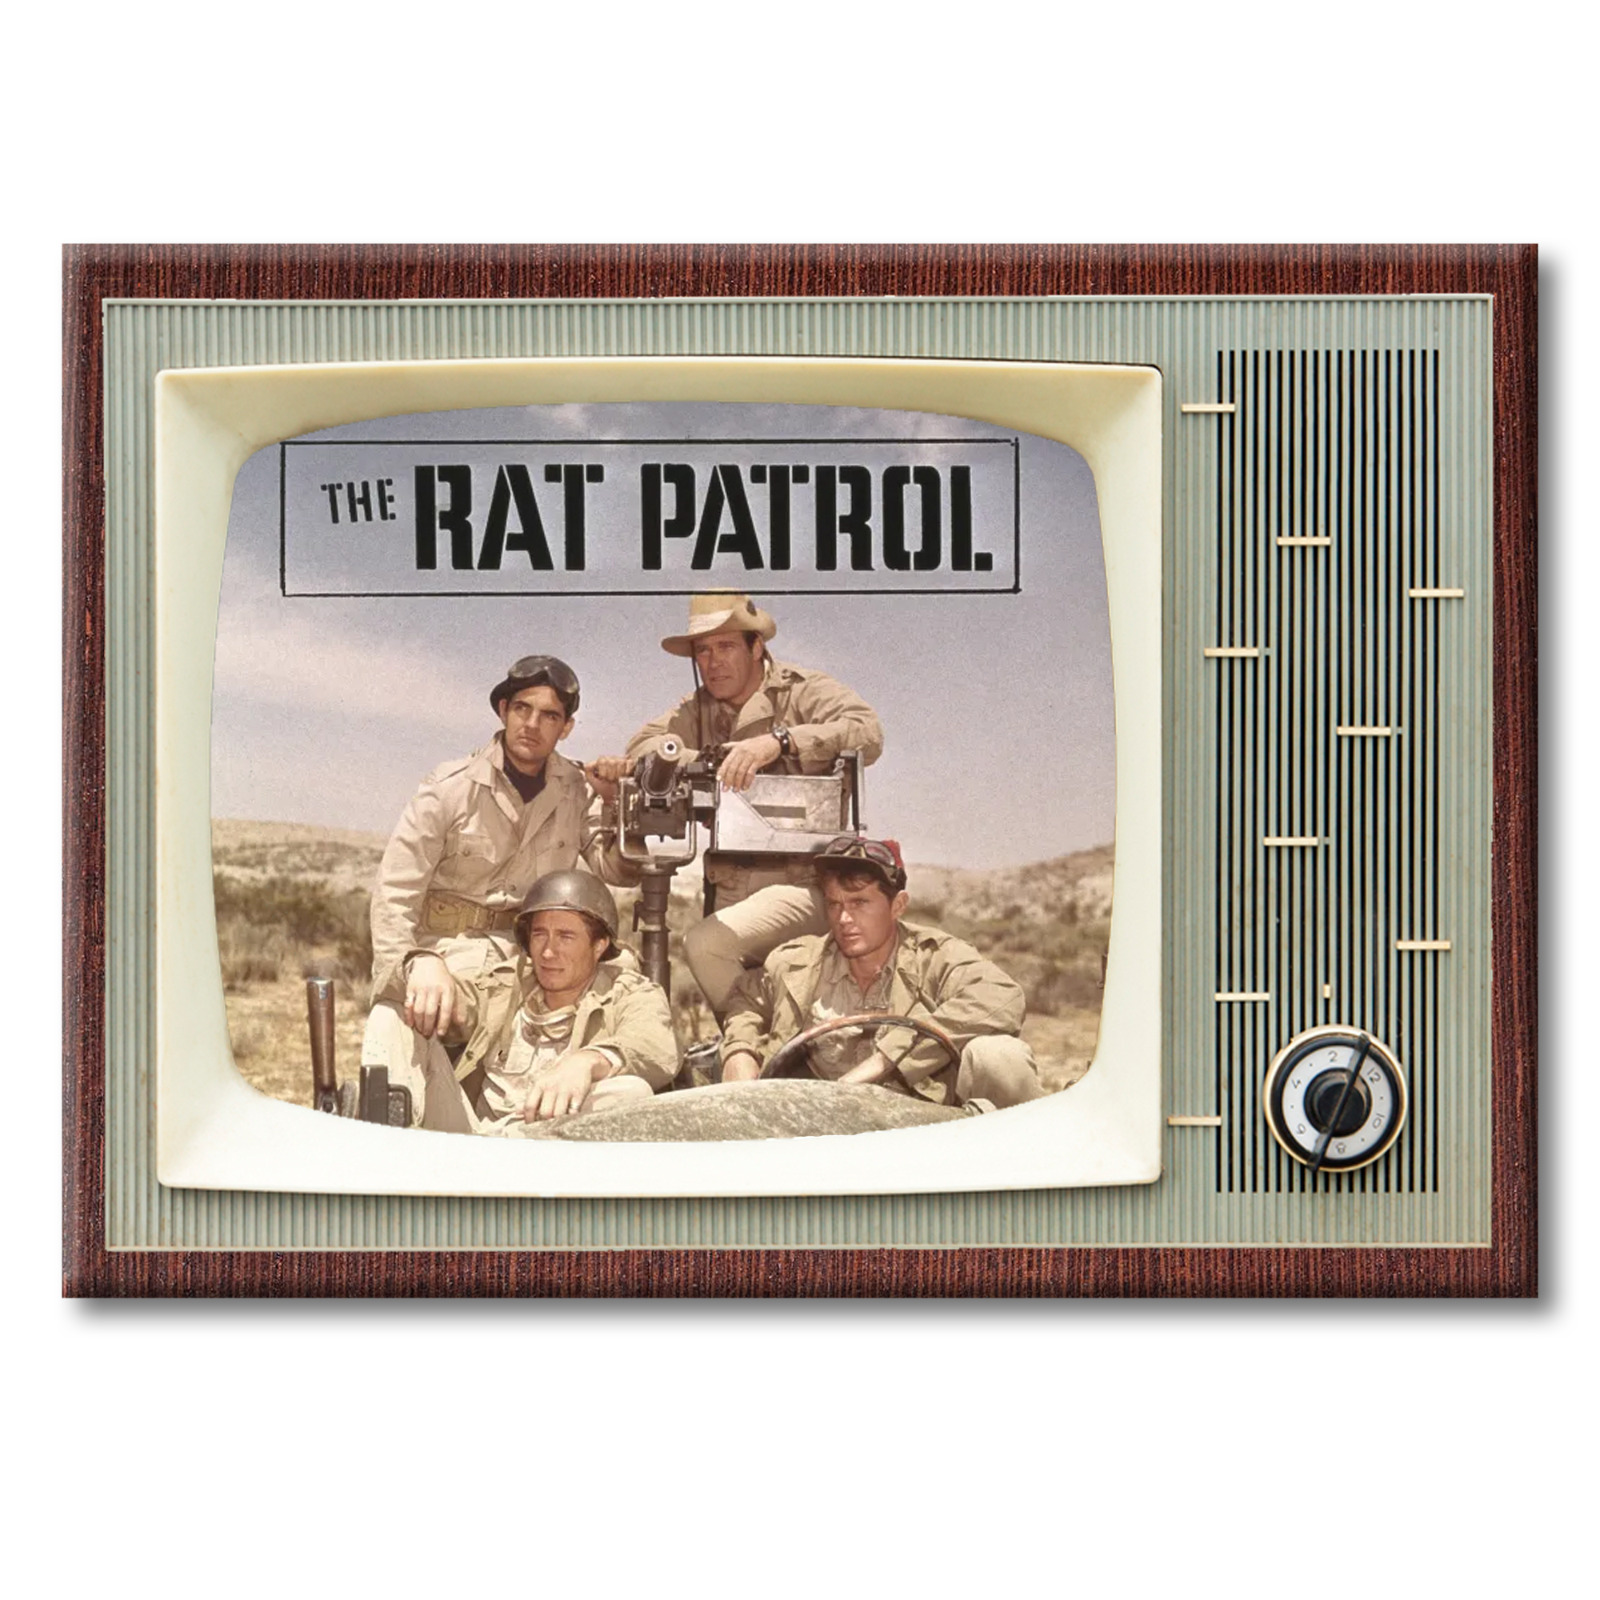 THE RAT PATROL TV Show TV 3.5 inches x 2.5 inches Steel FRIDGE MAGNET